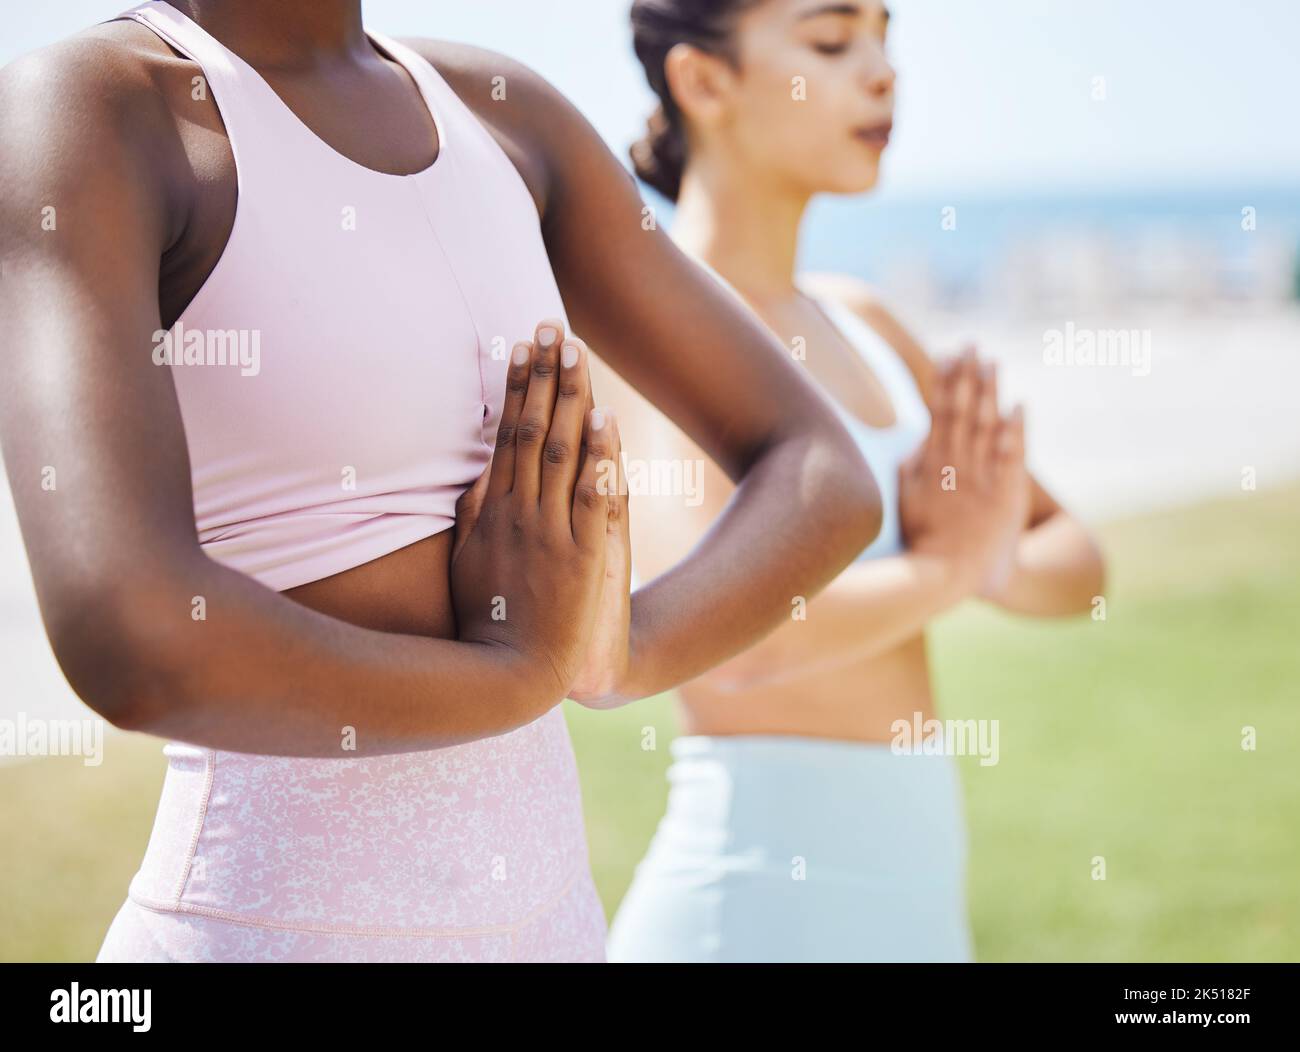 Meditation women, nature and namaste hands praying zen energy, peace or spiritual training, workout and outdoor exercise. Calm, relax and yoga fitness Stock Photo